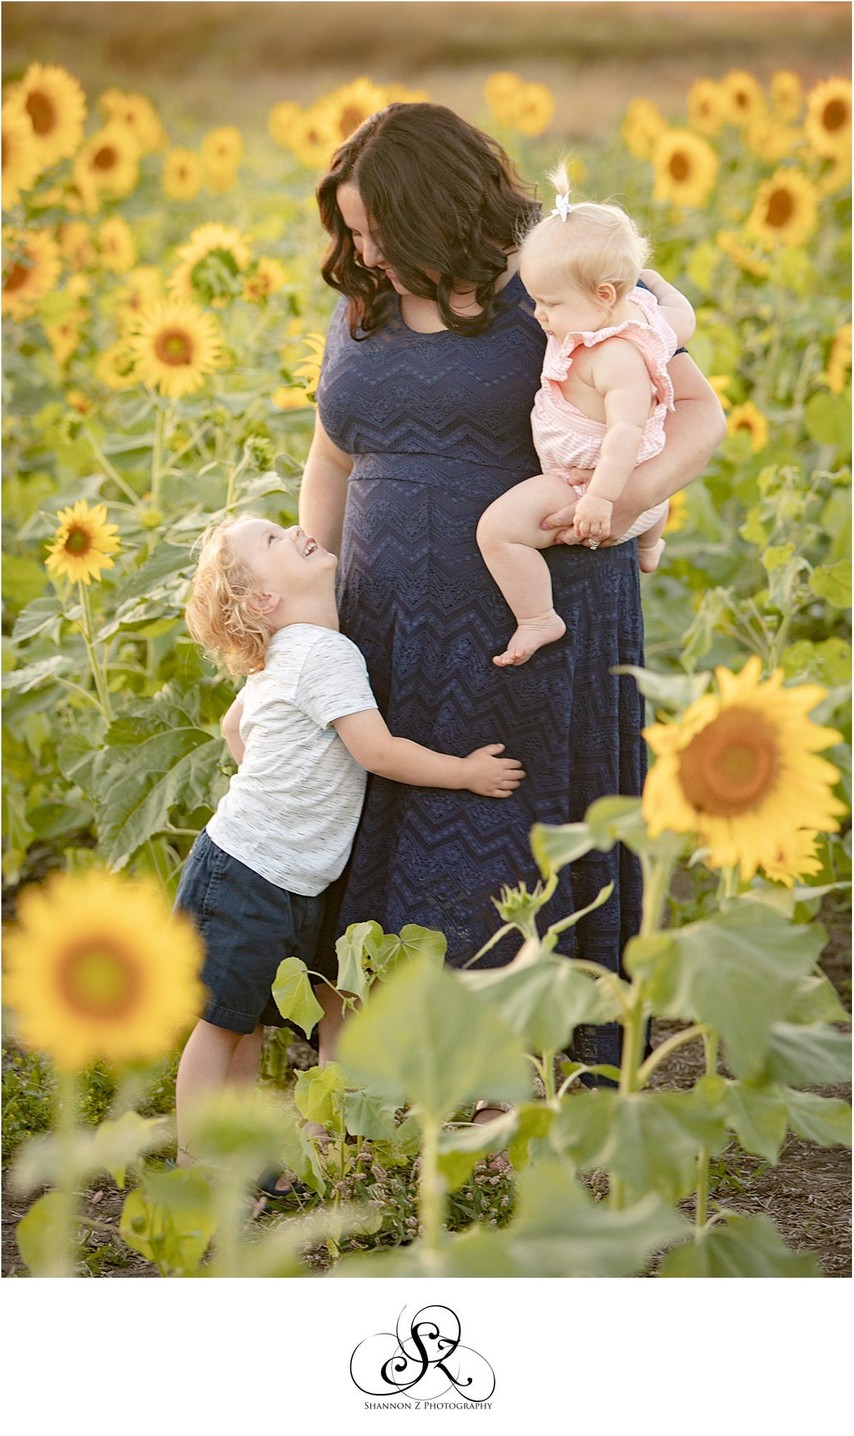 Mom with Kids: Family Photos